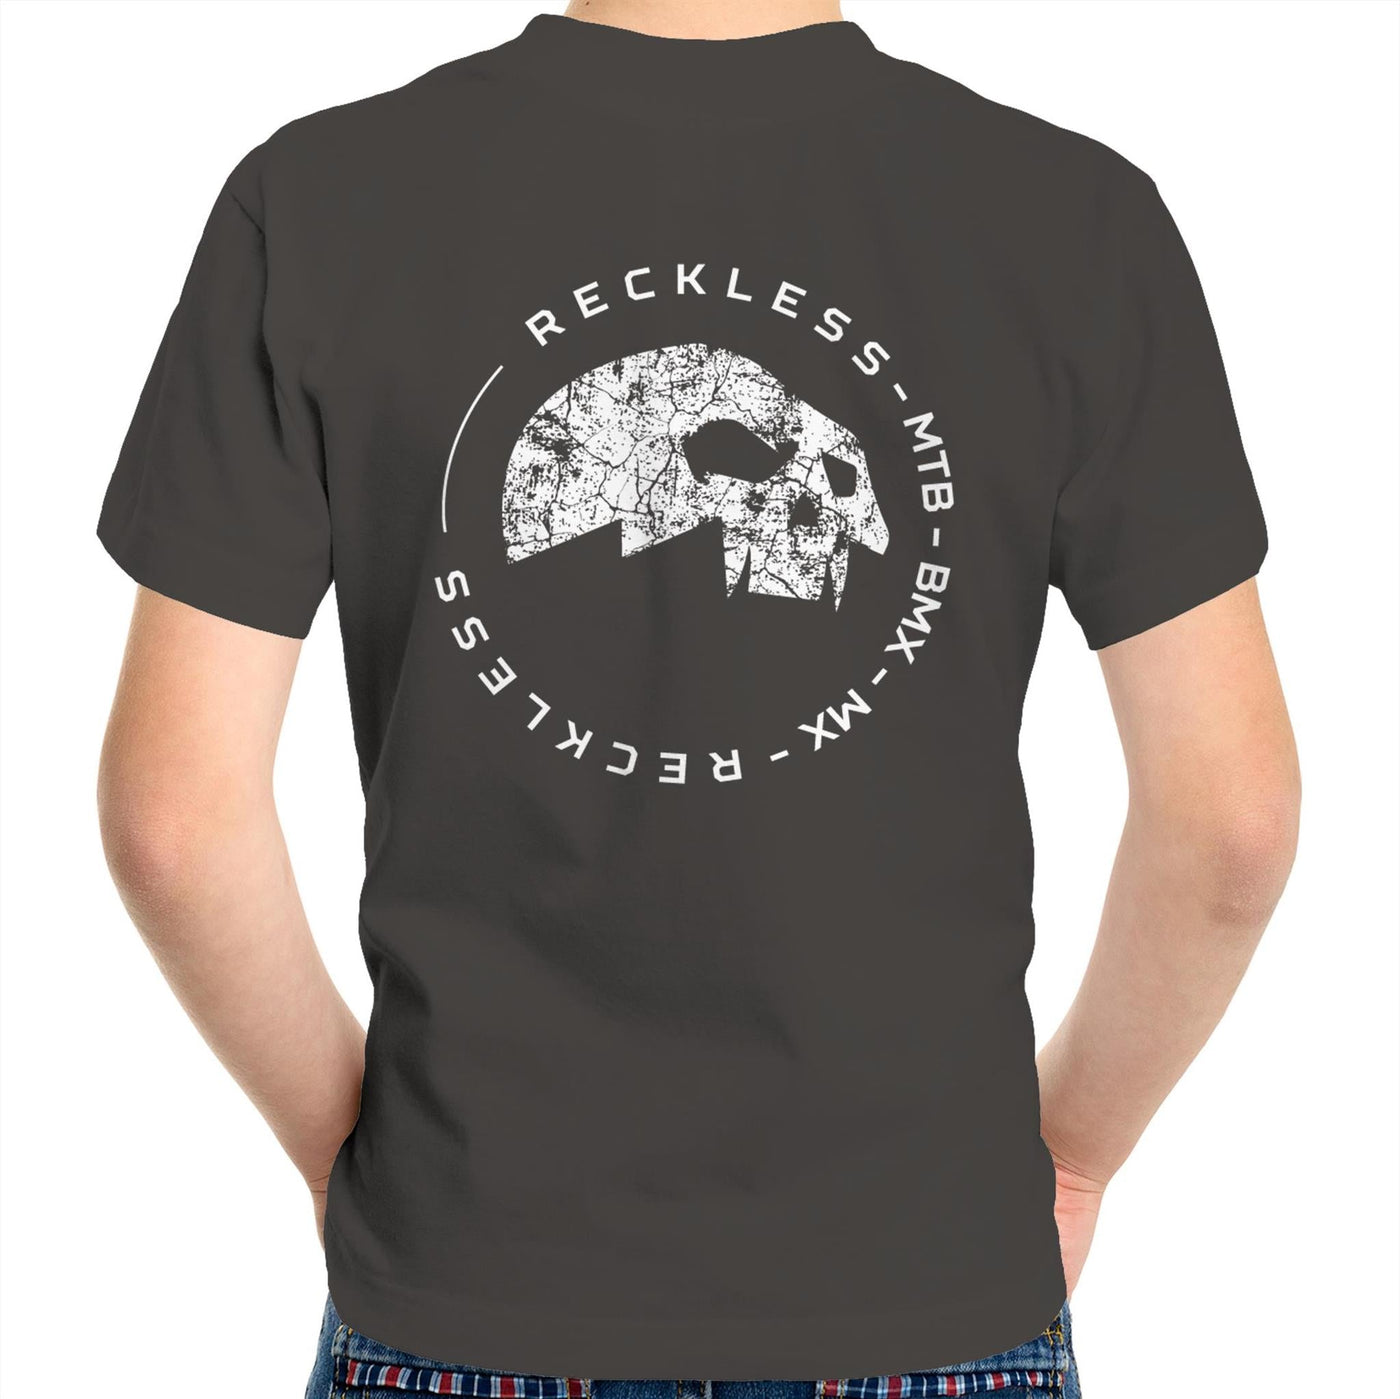 Reckless Youth Skull T - Reckless MTB BMX MX Store